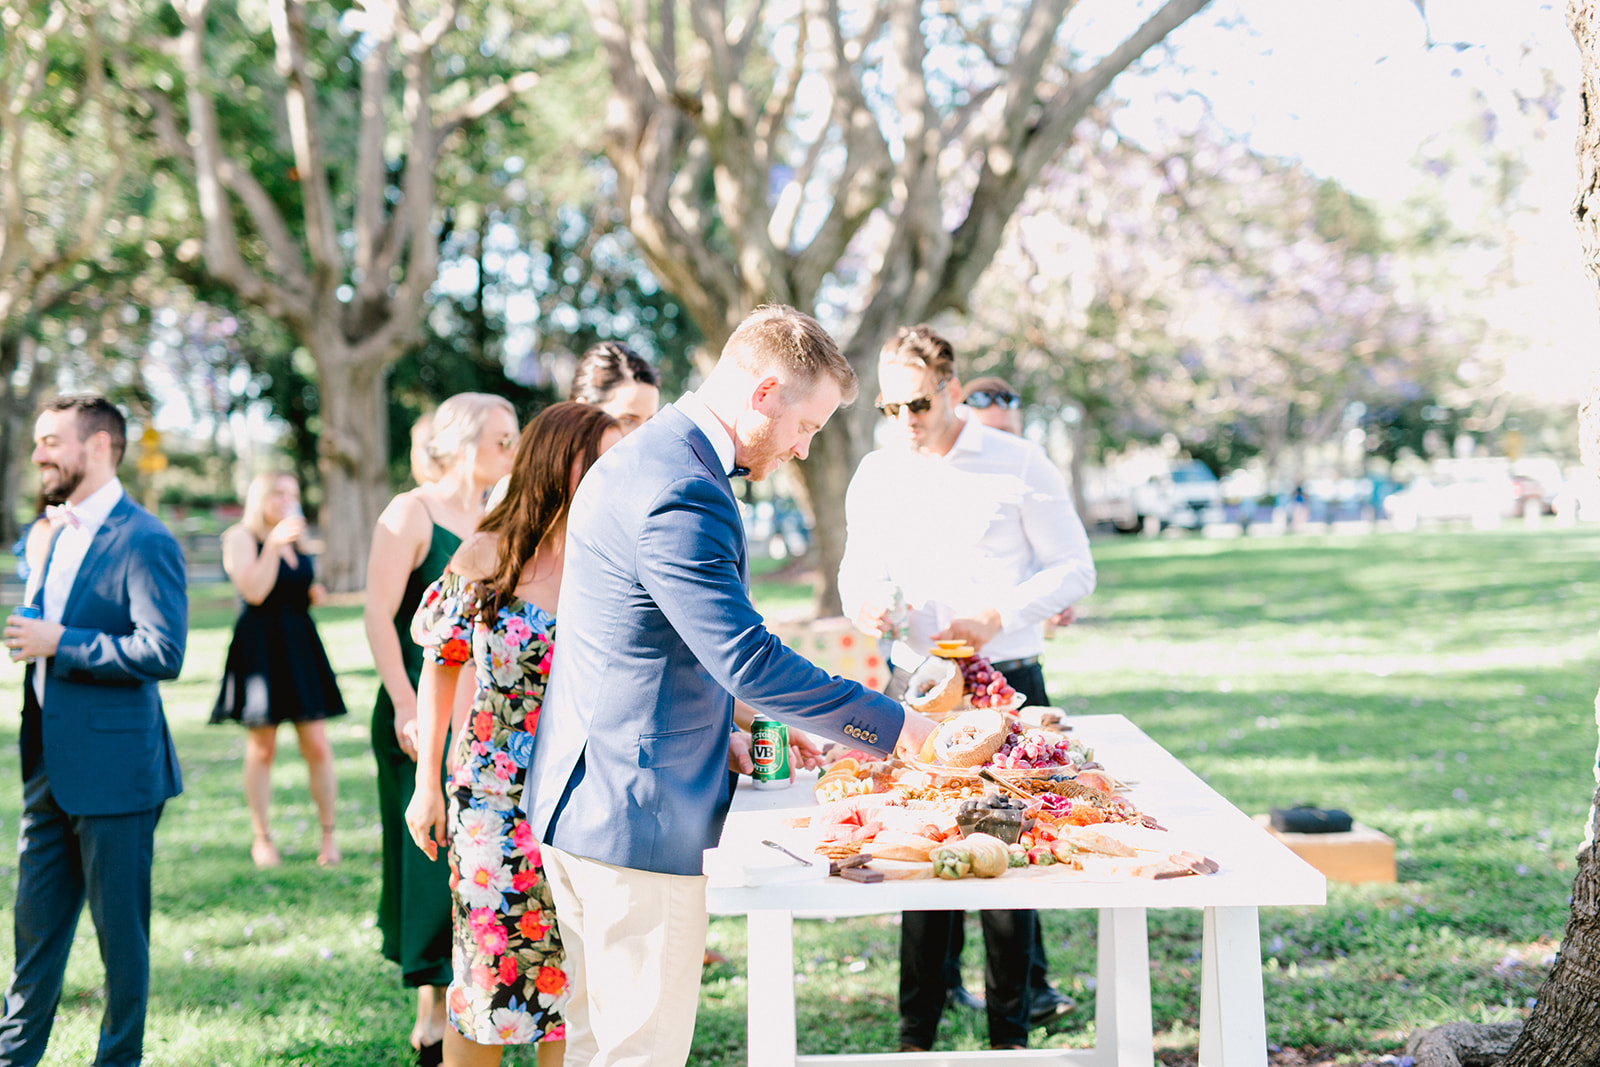 Wedding serving table